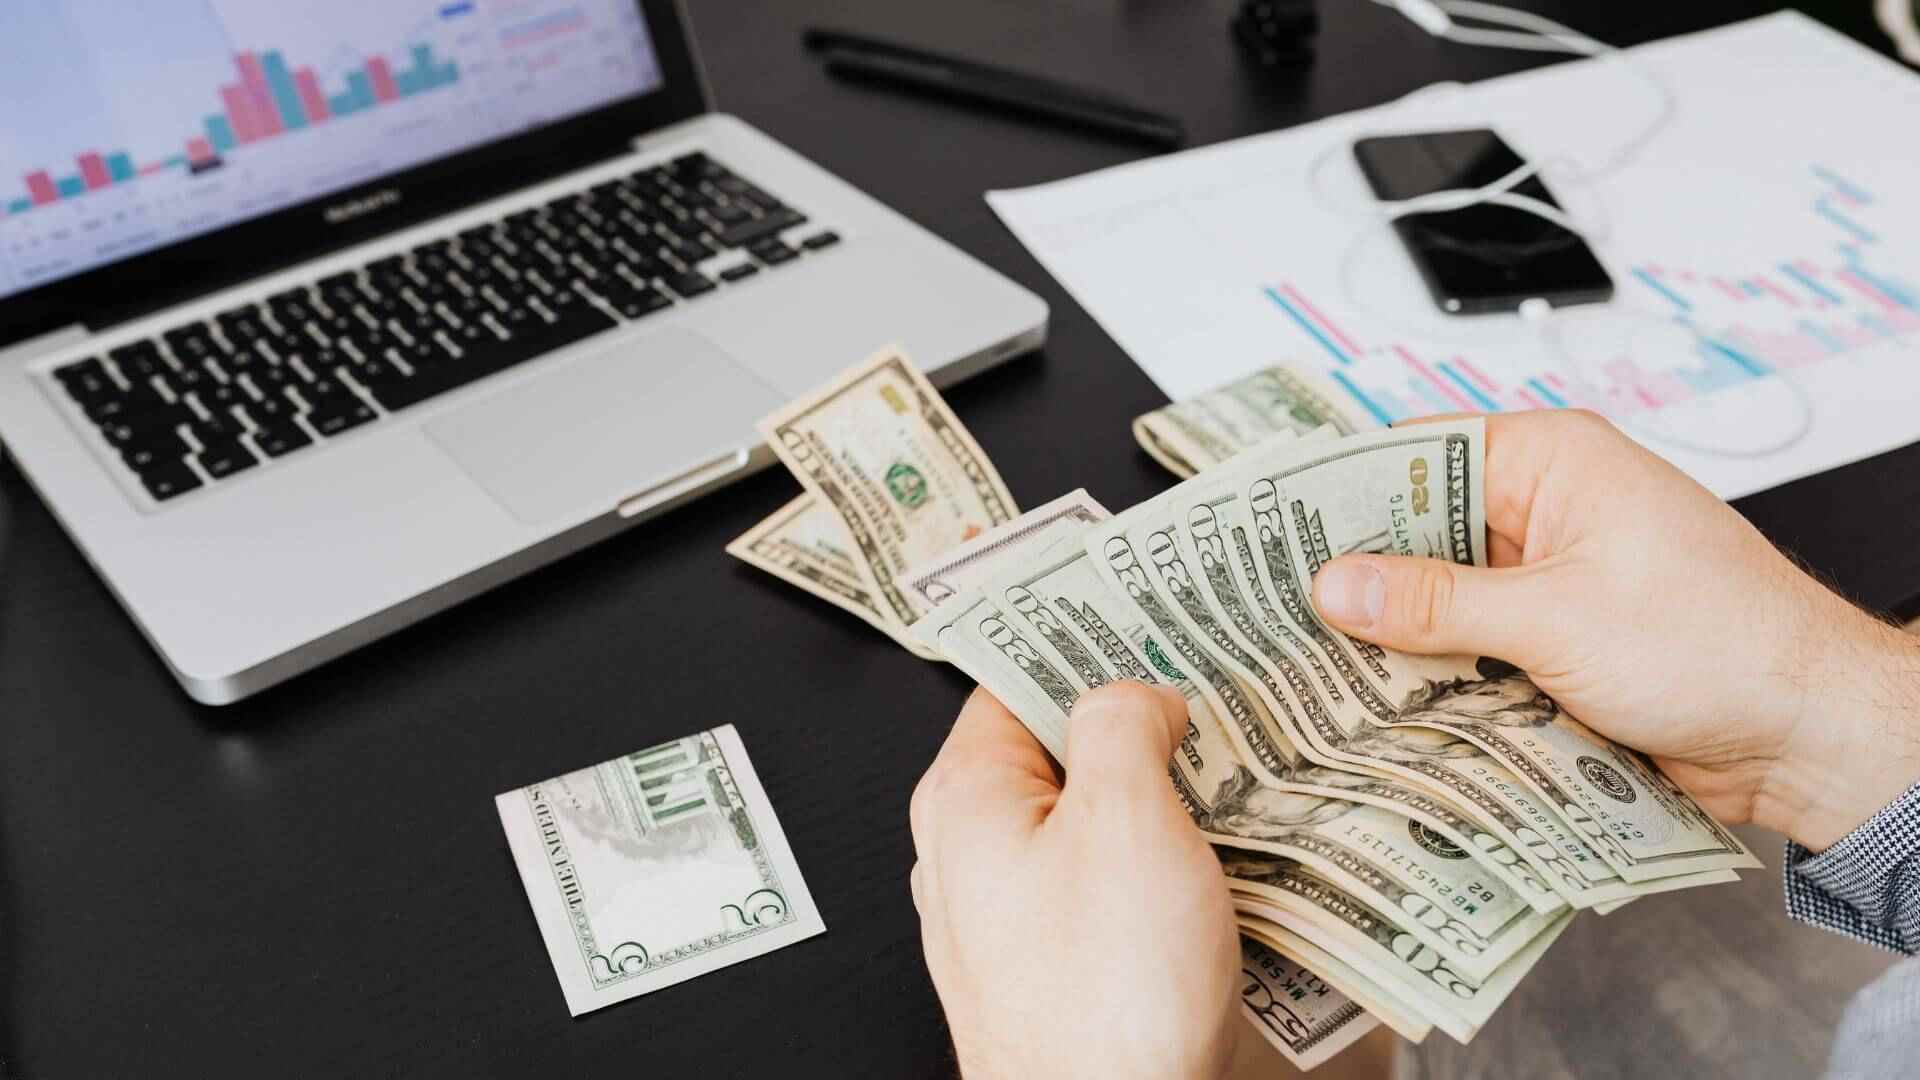 A close-up on a property investor’s hands counting American money at a desk, with figures on a laptop in the background.